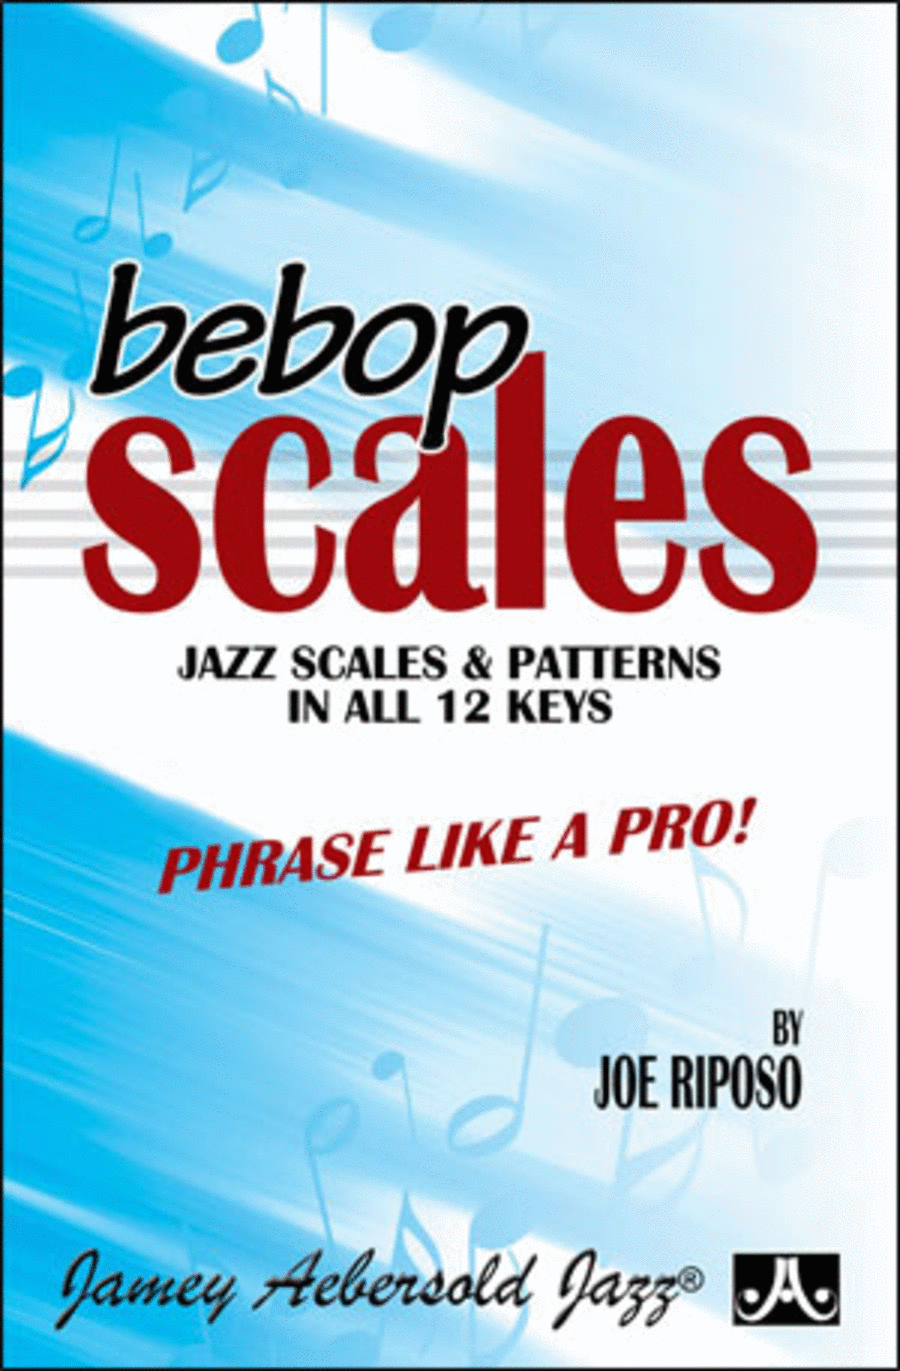  Scales - Jazz Scales And Patterns In All 12 Keys